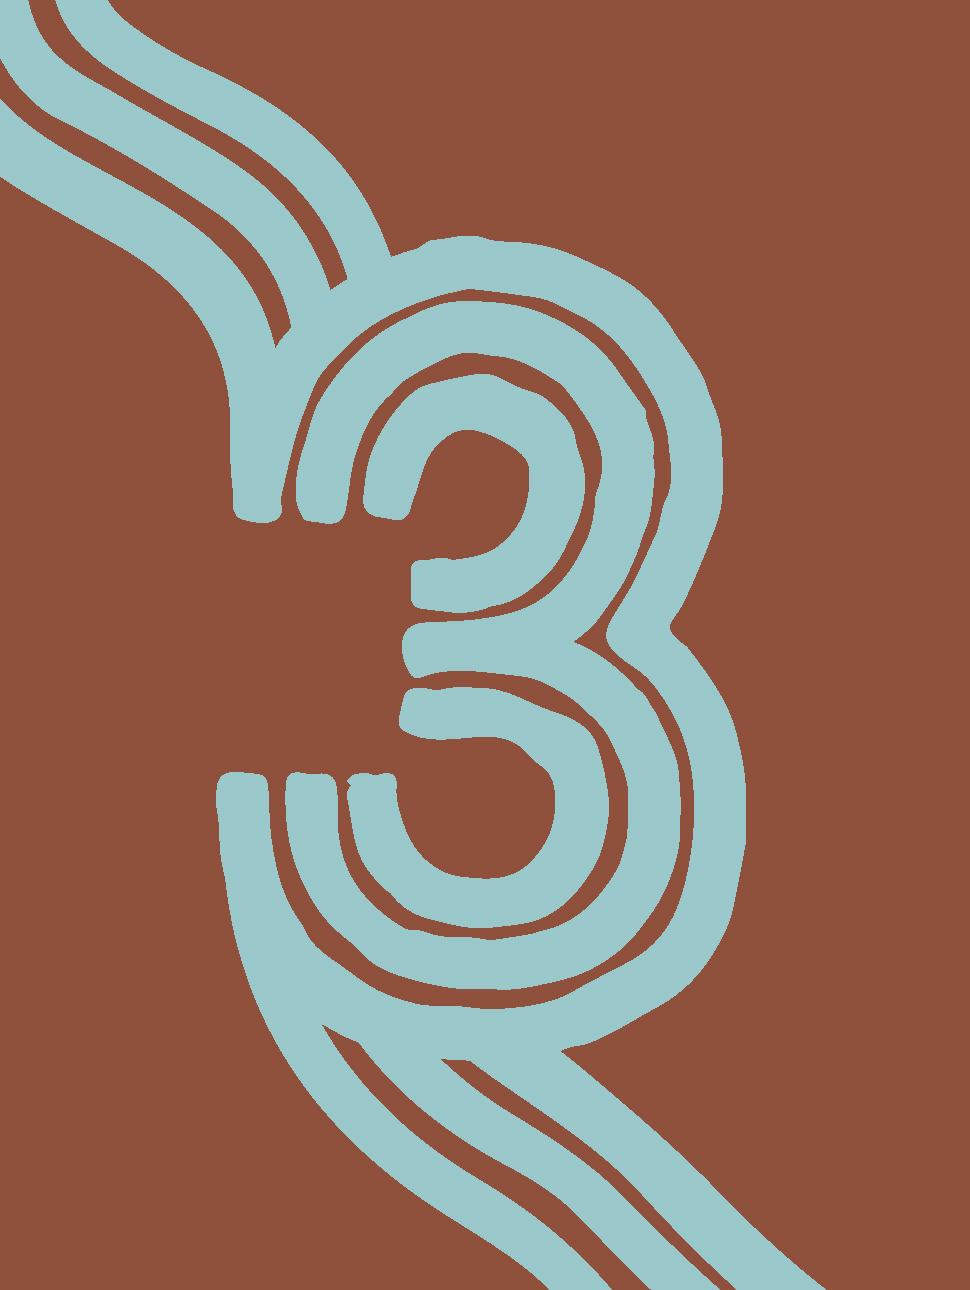 Brown tile with the number three make from three blue lines sits centrally